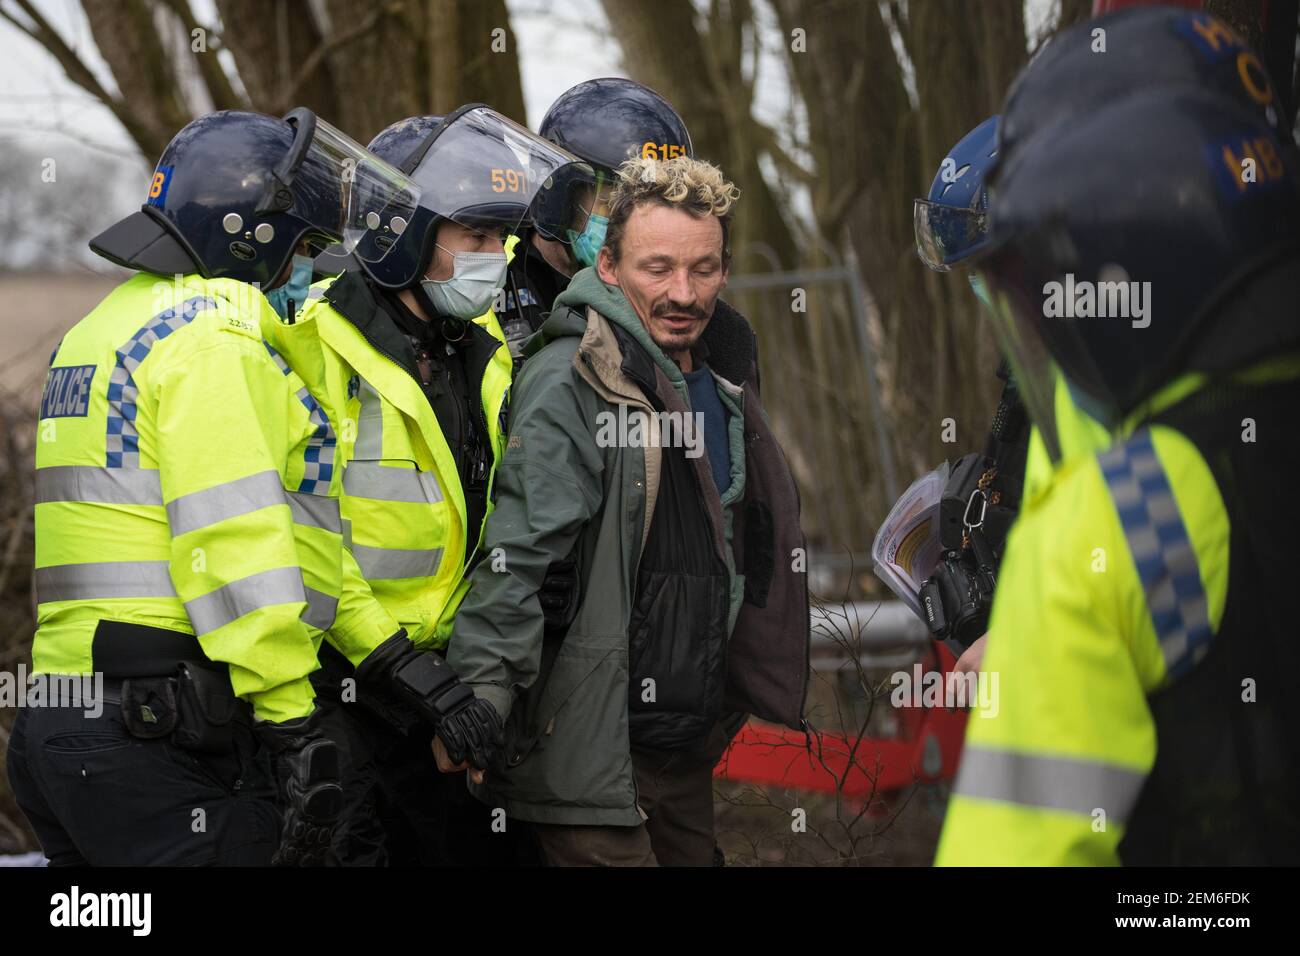 Steeple Claydon, UK. 24 February, 2021. Thames Valley Police officers arrest an activist opposed to the HS2 high-speed rail link after evicting him from ancient woodland known as Poors Piece. Thames Valley Police stepped in to replace National Eviction Team bailiffs. The activists created the Poors Piece Conservation Project in the woodland in spring 2020 after having been invited to stay on the land by its owner, farmer Clive Higgins. Credit: Mark Kerrison/Alamy Live News Stock Photo